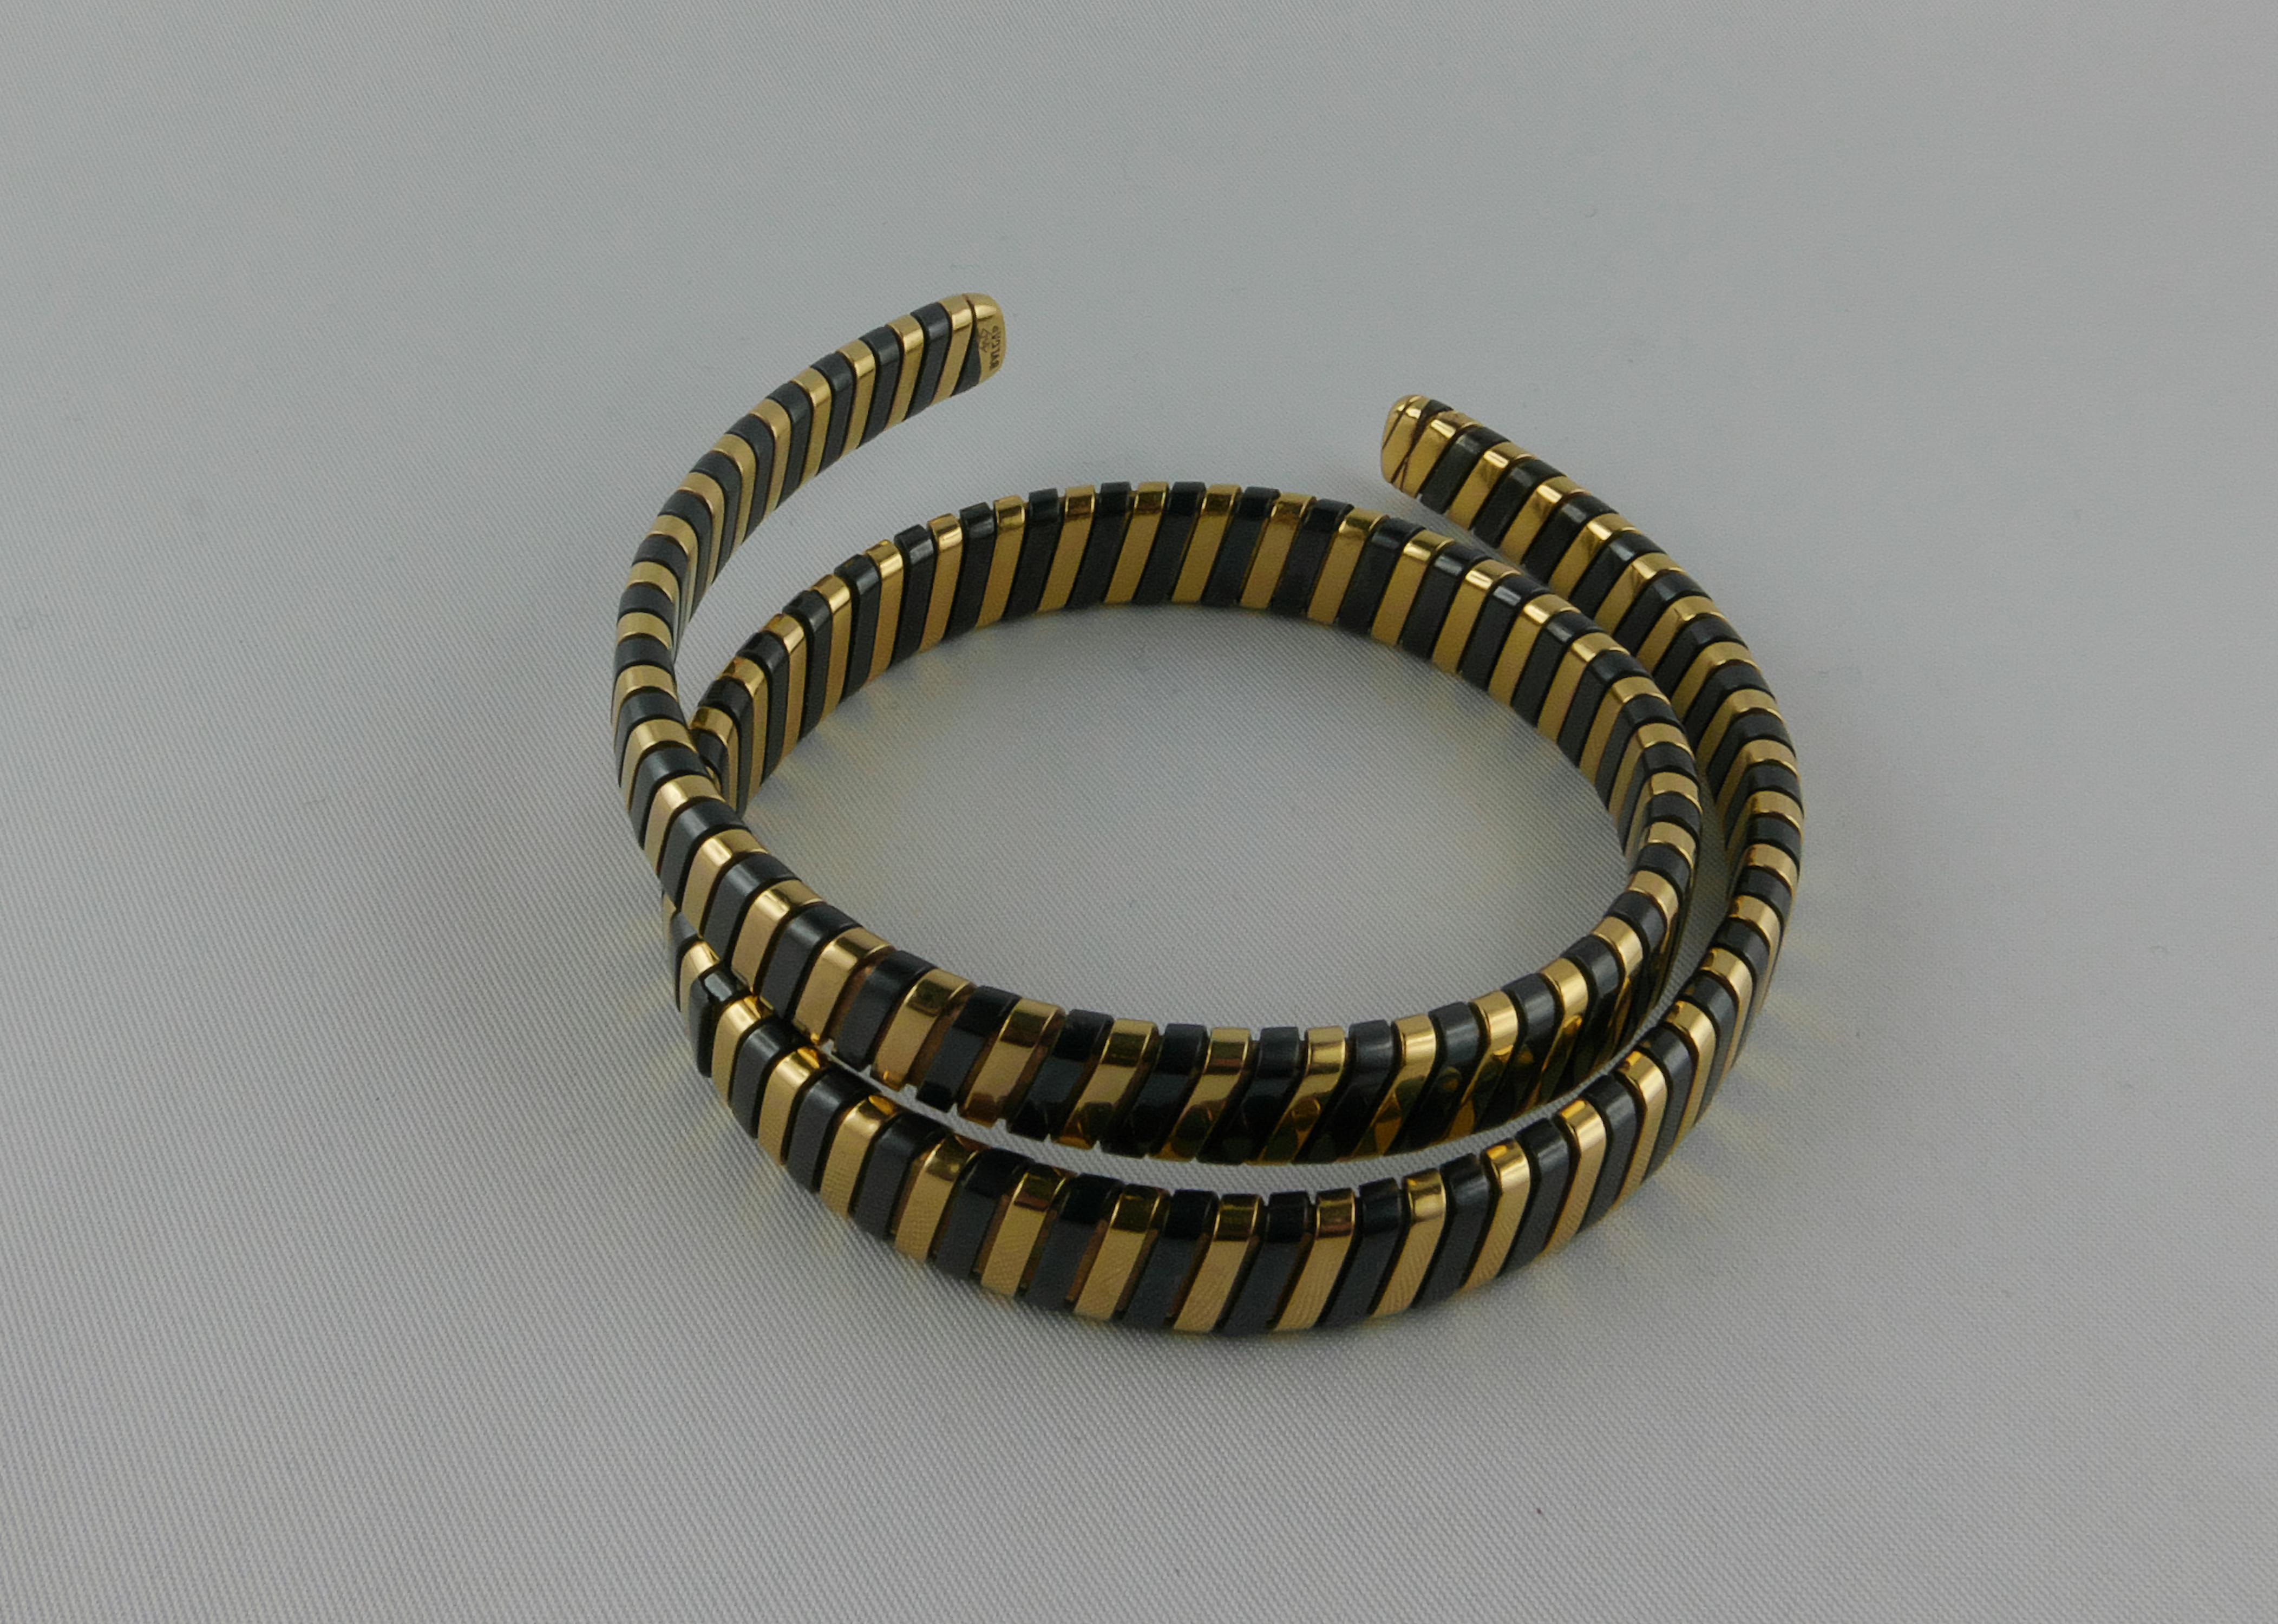 Italian 1980’s flexible Chocker signed Bvlgari, with the iconic Tubogas linear pattern, crafted in 18k polished Gold.  This necklace is a rare piece with alternated blackened Steel and Yellow Gold
Marked  BVLGARI,  750. Total weight 84.9 grams 
This